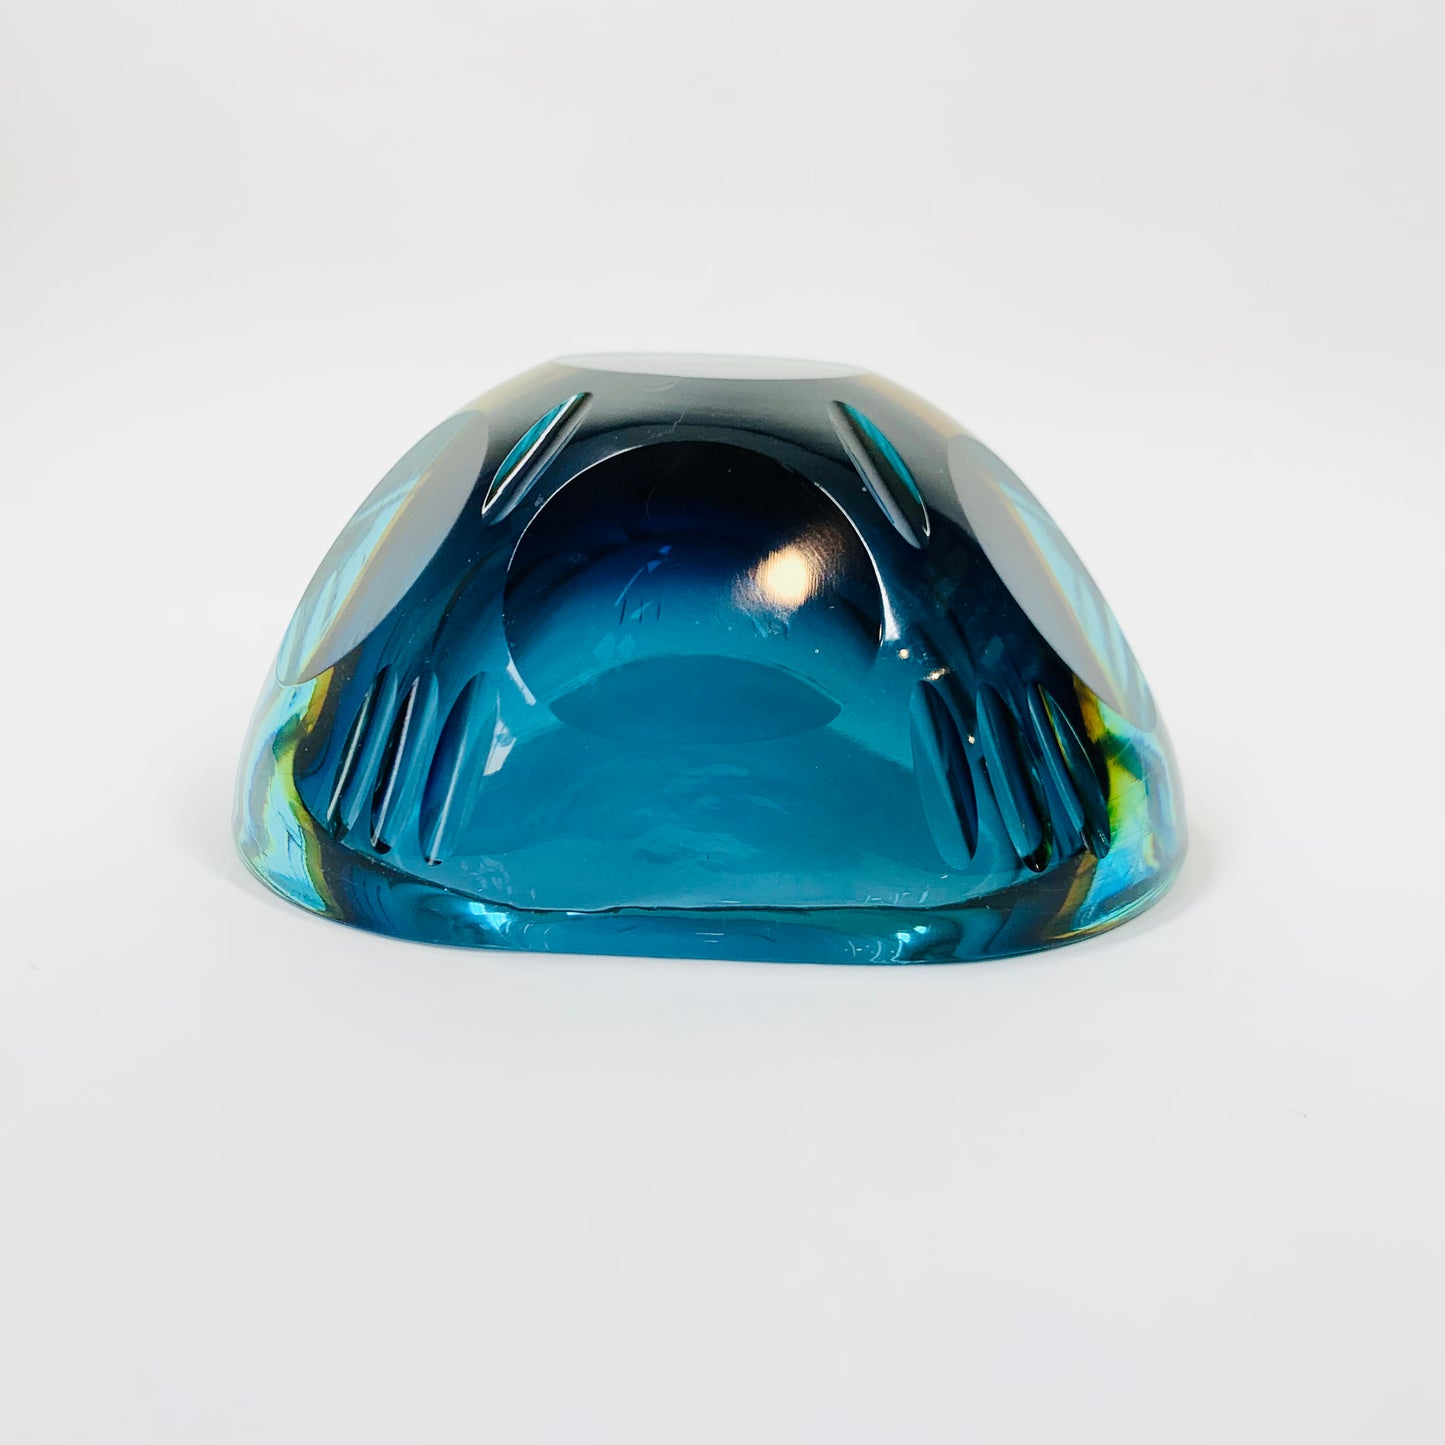 Extremely rare MCM blue green faceted Murano glass geode bowl by Mandruzatto